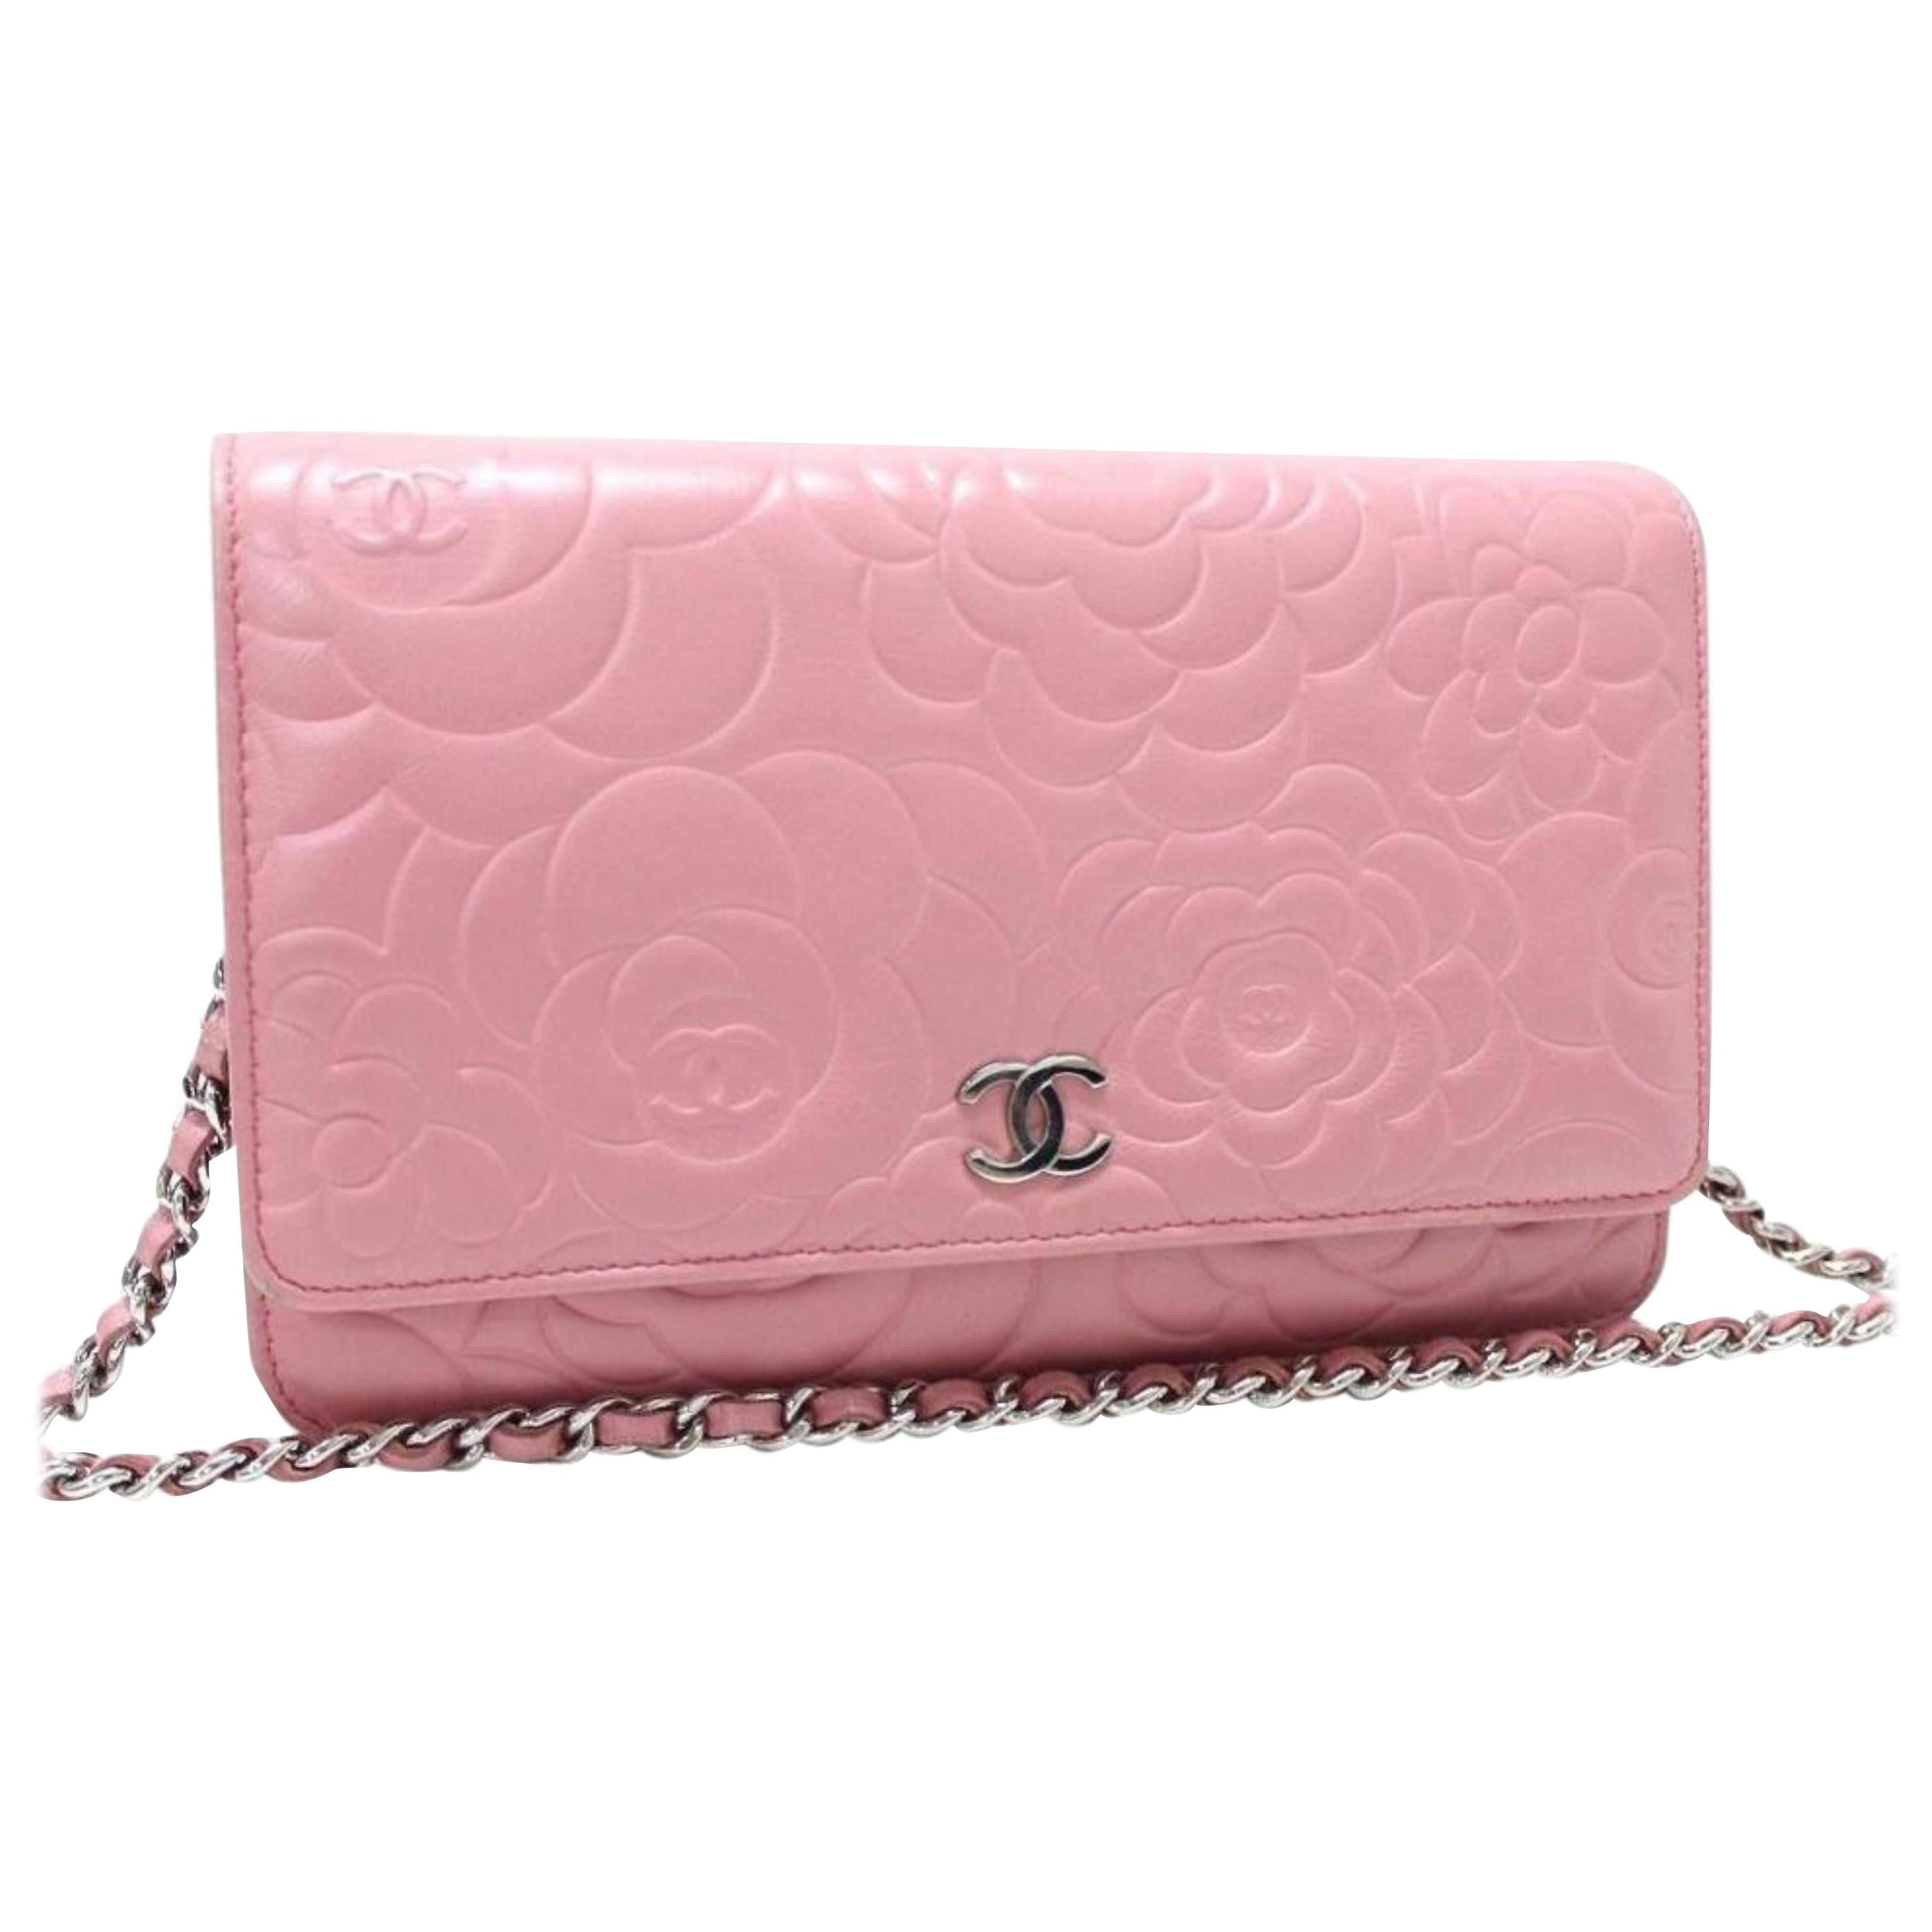 Chanel Wallet on Chain Camellia 3cr0108 Pink Leather Cross Body Bag For Sale